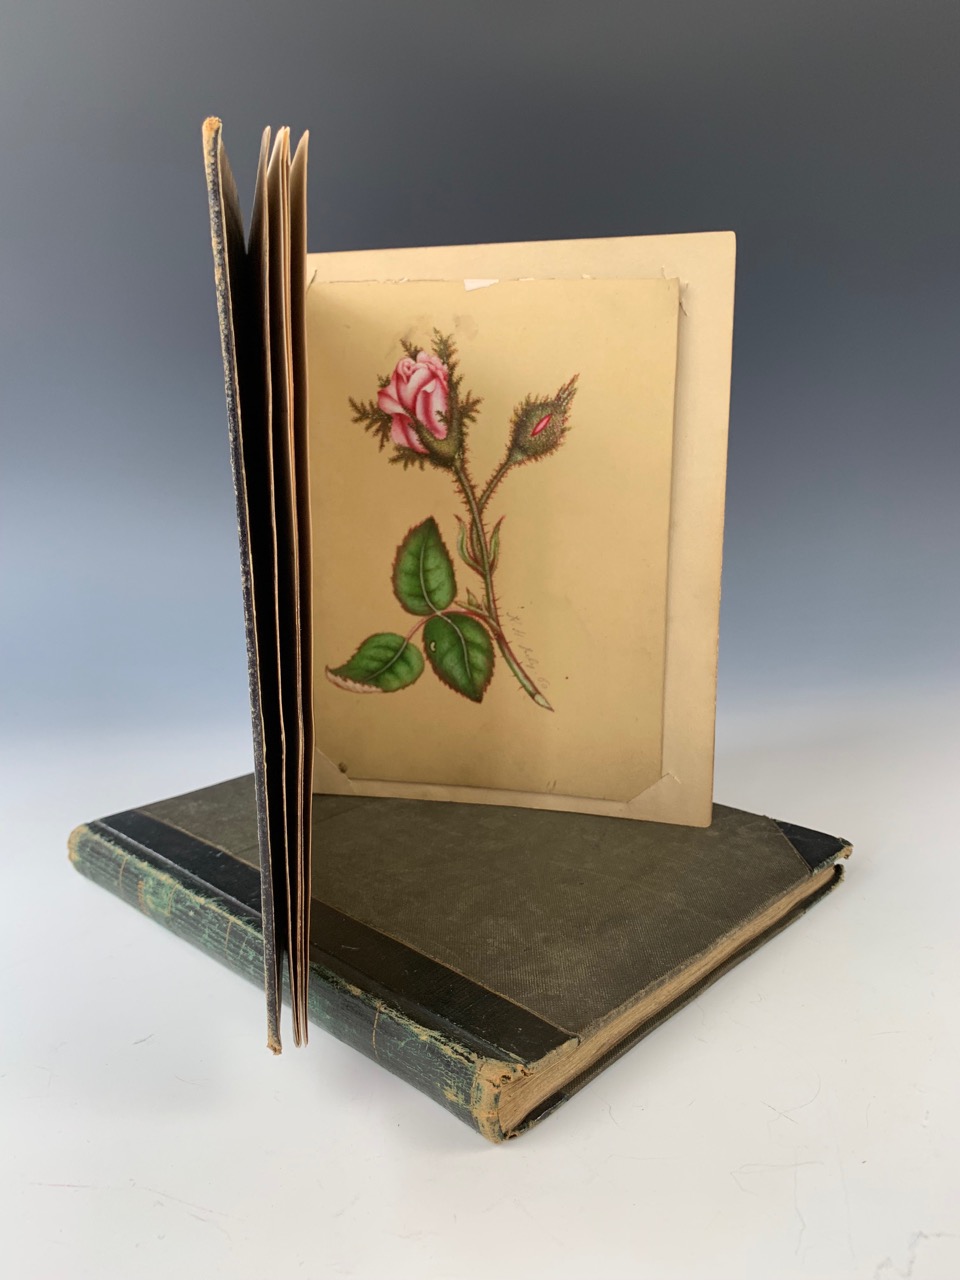 Two Victorian bon-mot albums, belonging to Ann Kirk and Helen Kirk respectively, containing